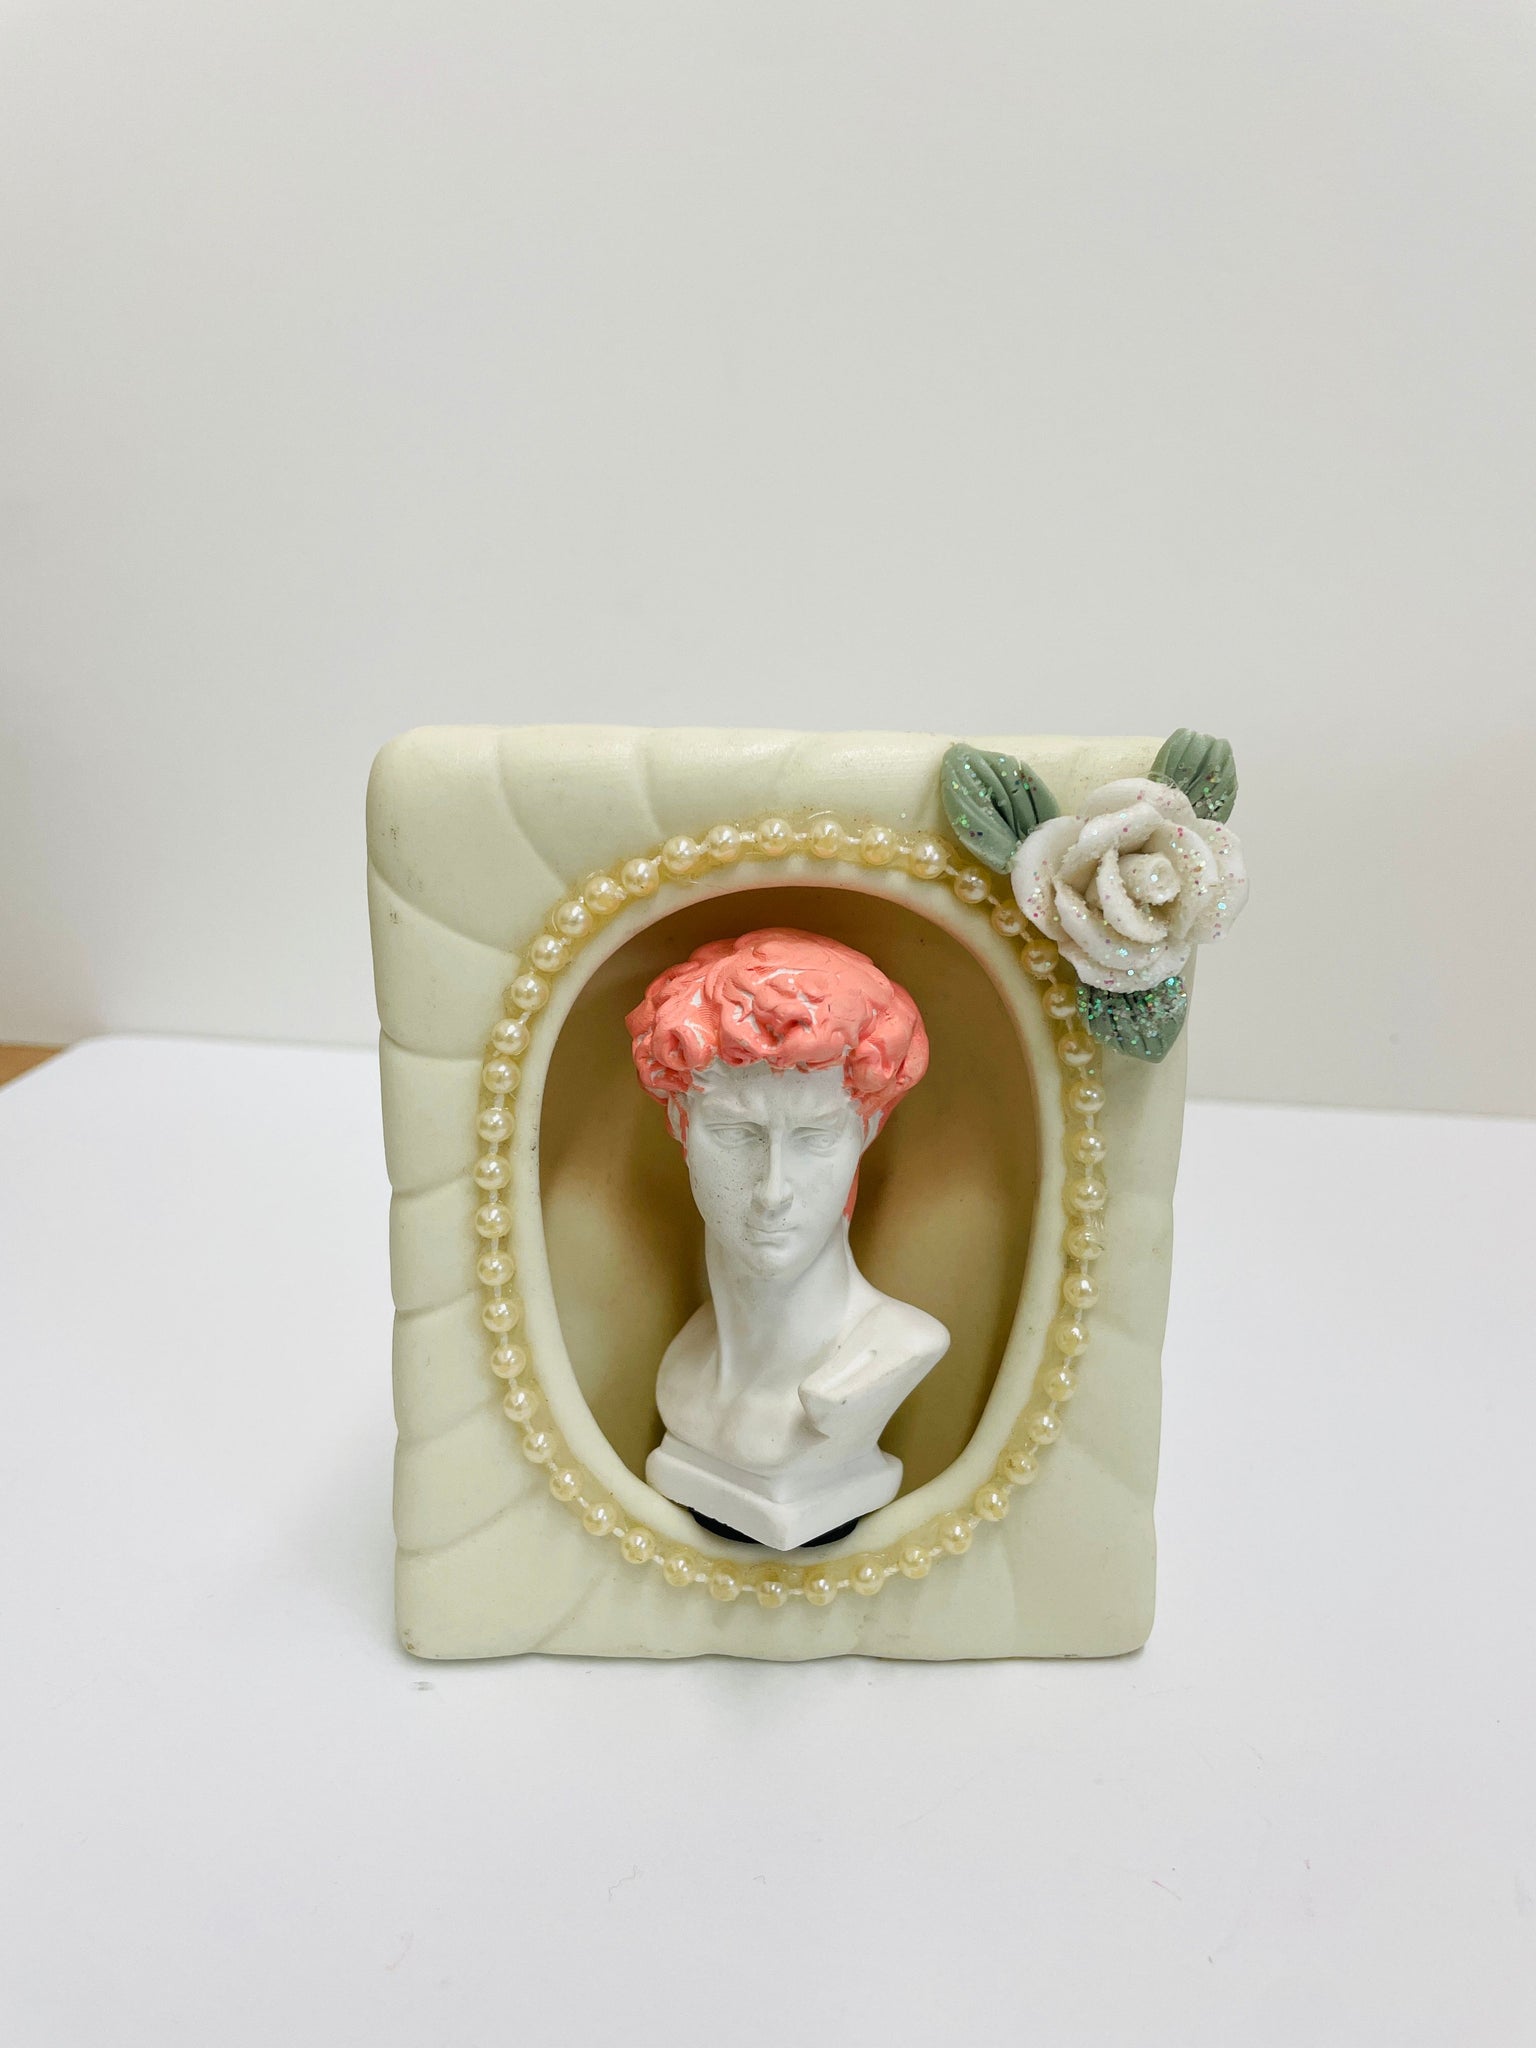 Luciana Pinchiero, "Framed Bust with Pink Hair from Shelves of Desire"